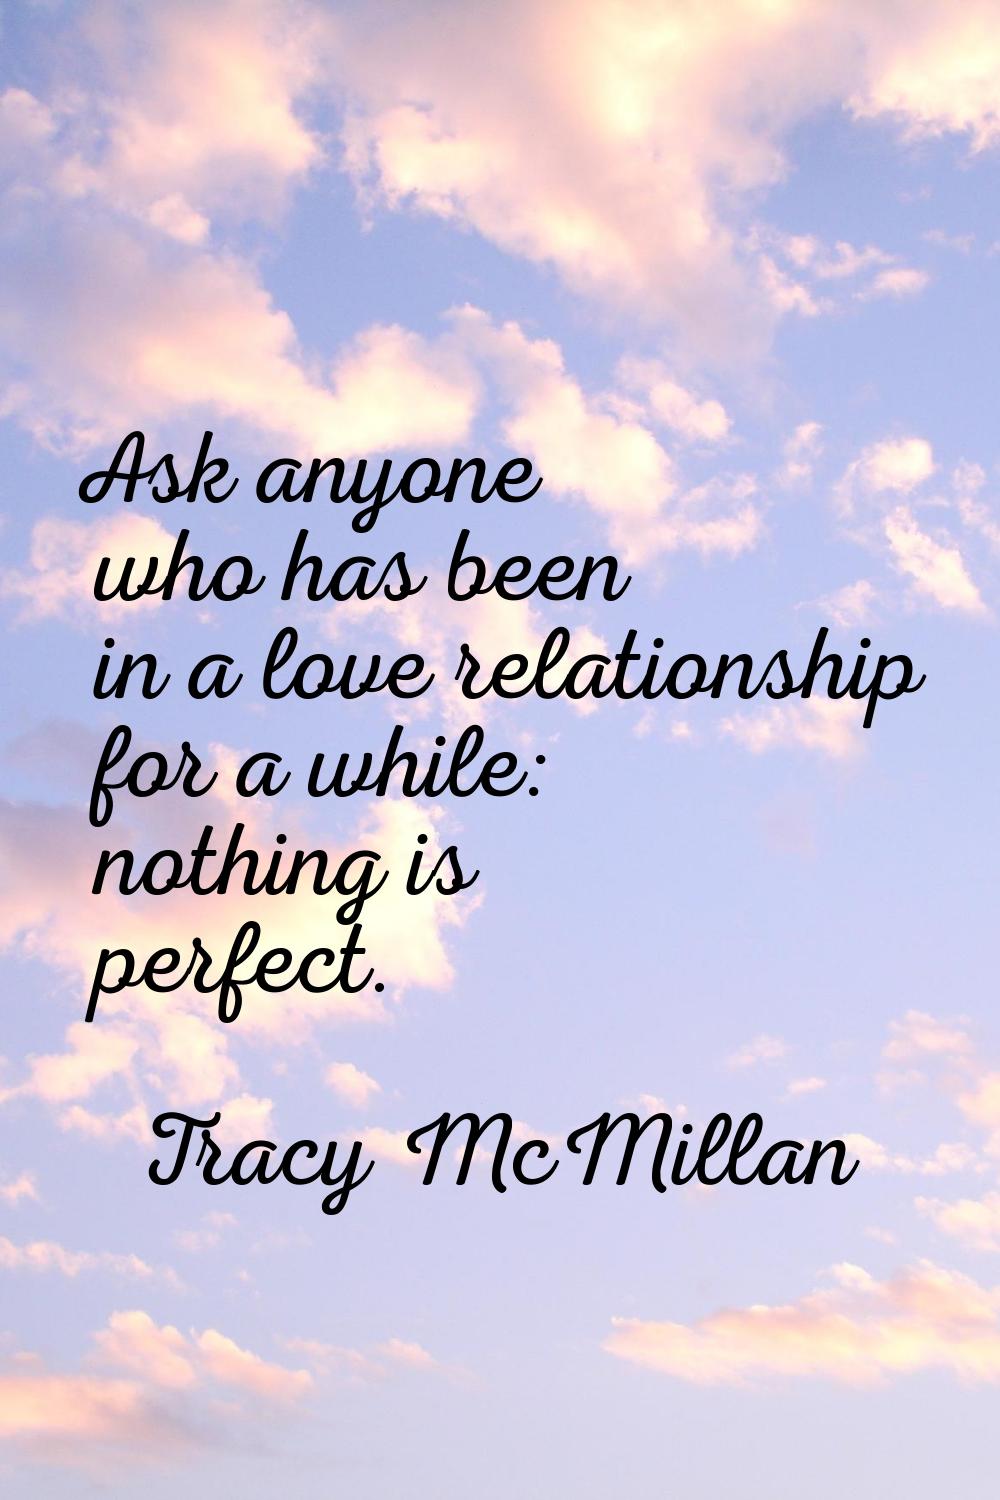 Ask anyone who has been in a love relationship for a while: nothing is perfect.